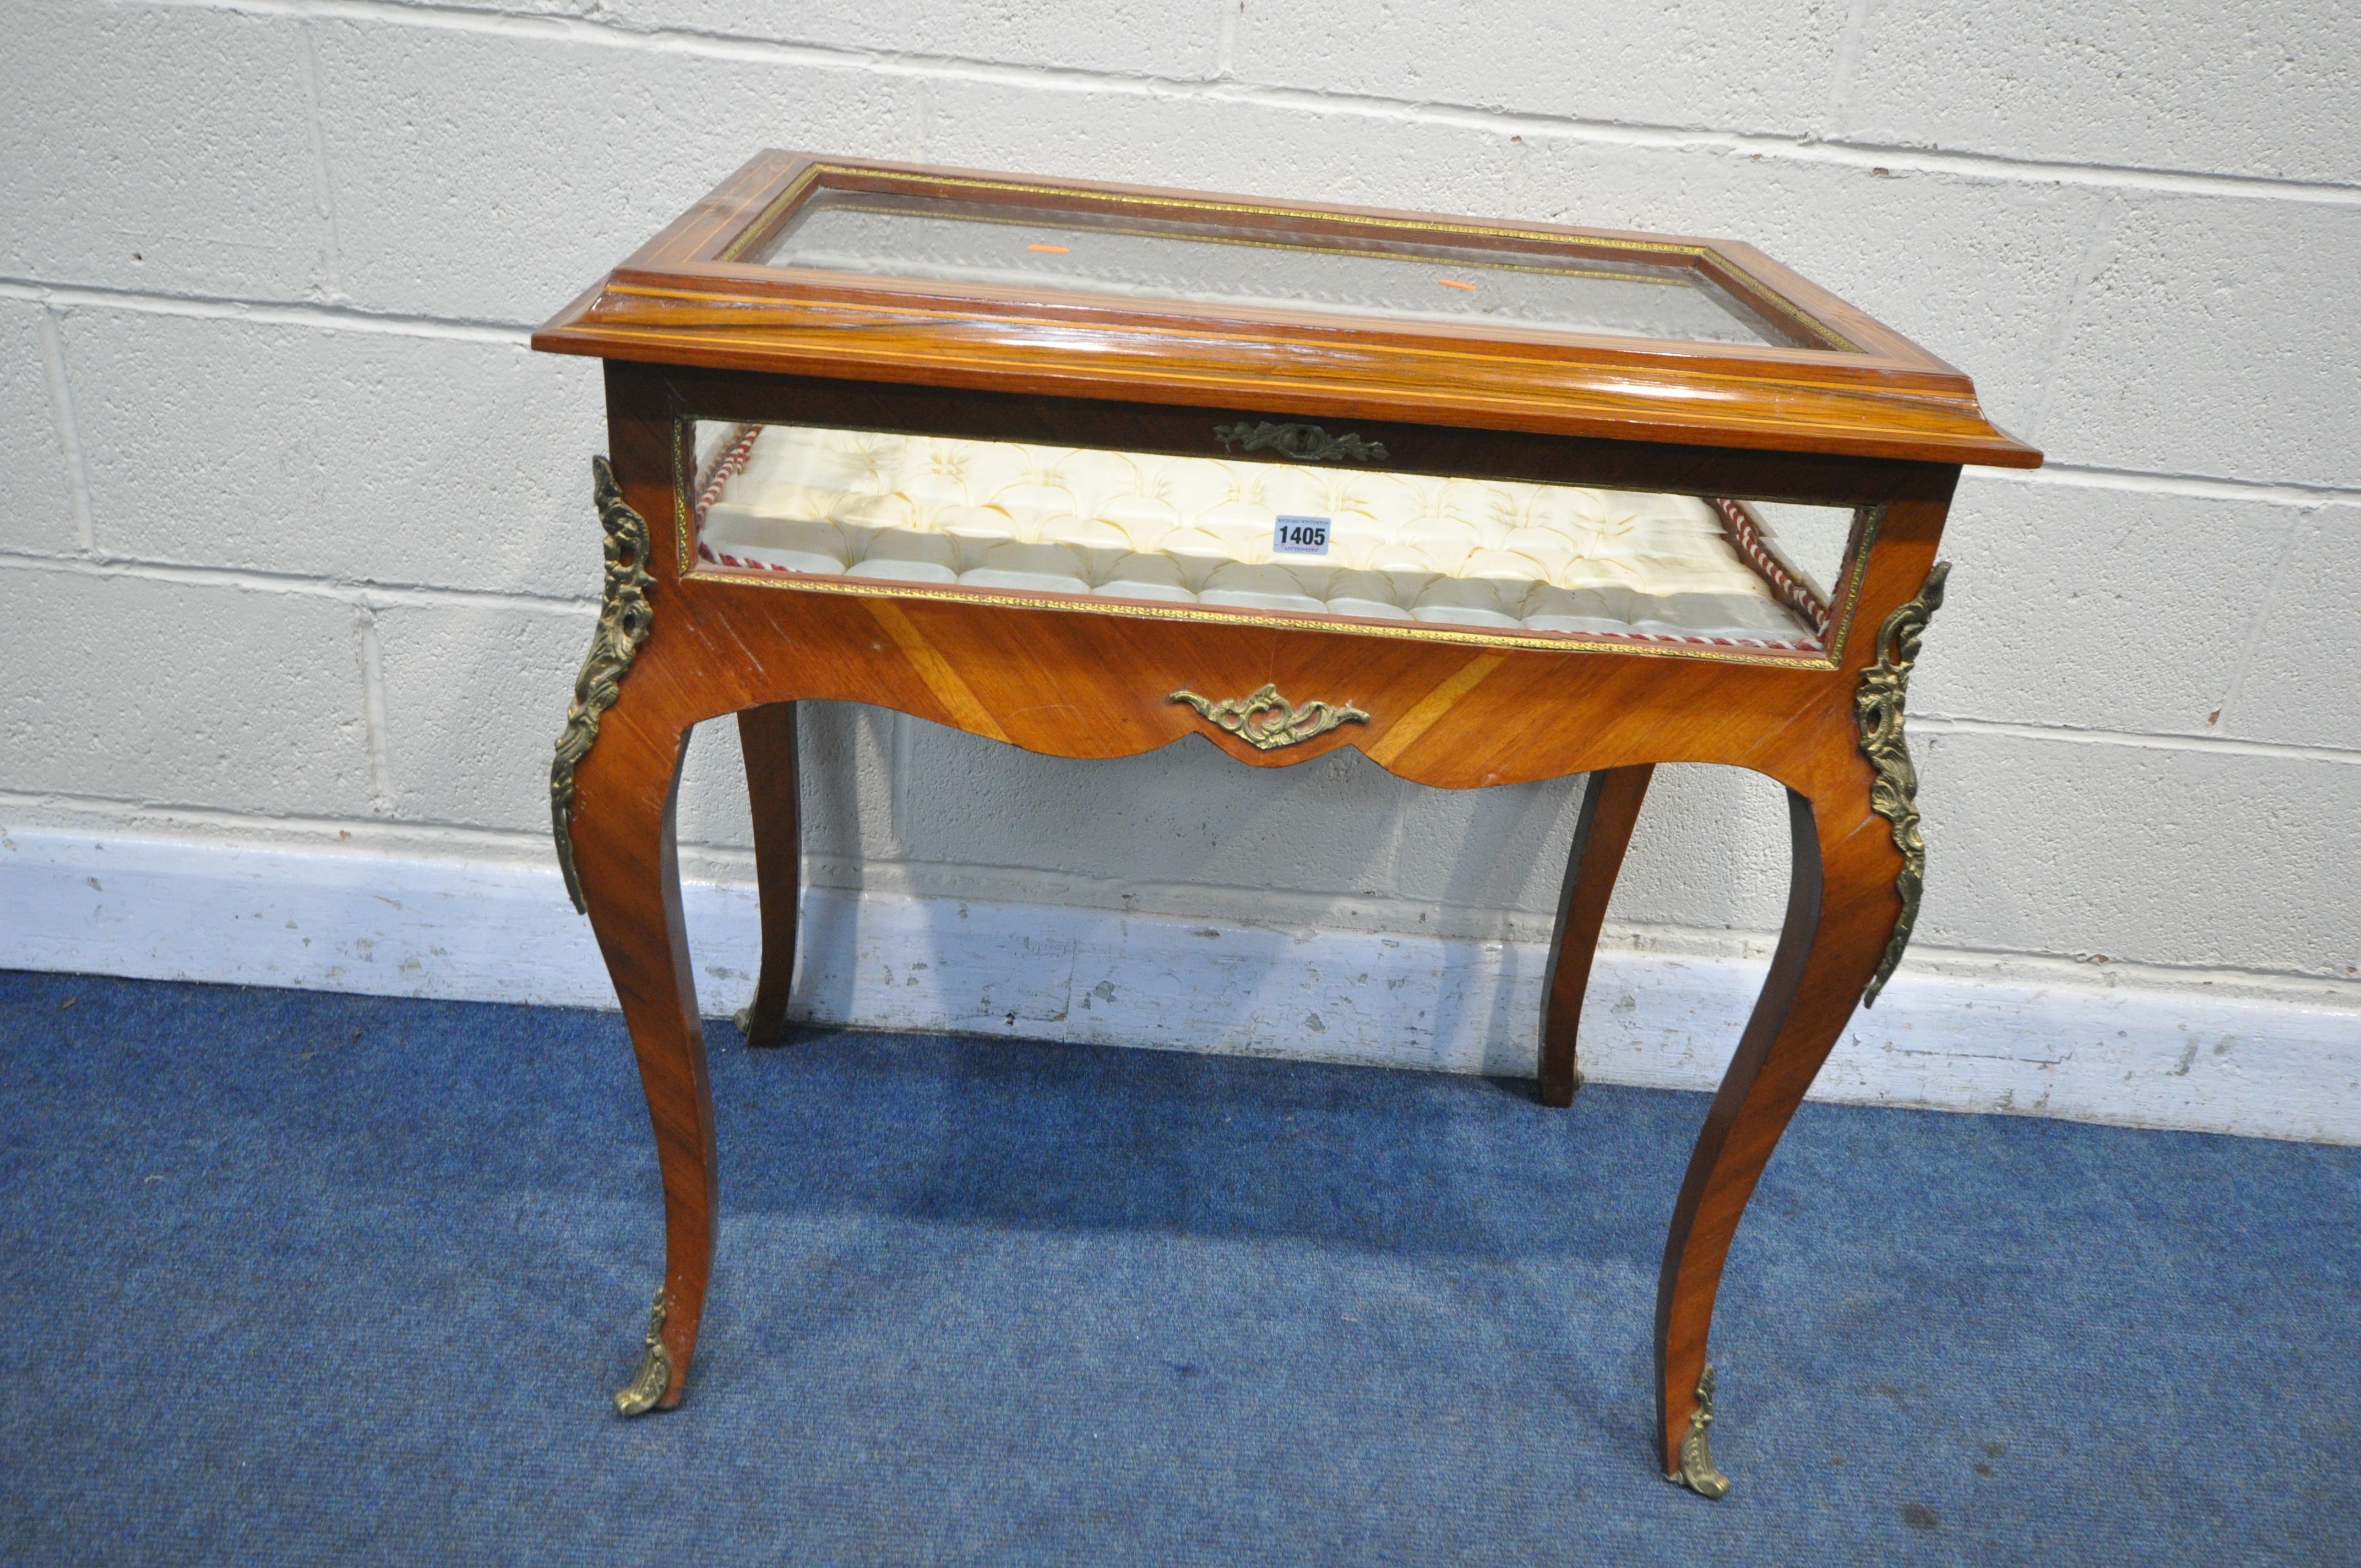 A FRENCH LOUIS XVI STYLE KINGWOOD BIJOUTERIE TABLE, with rosewood inlay and gilt metal mounts